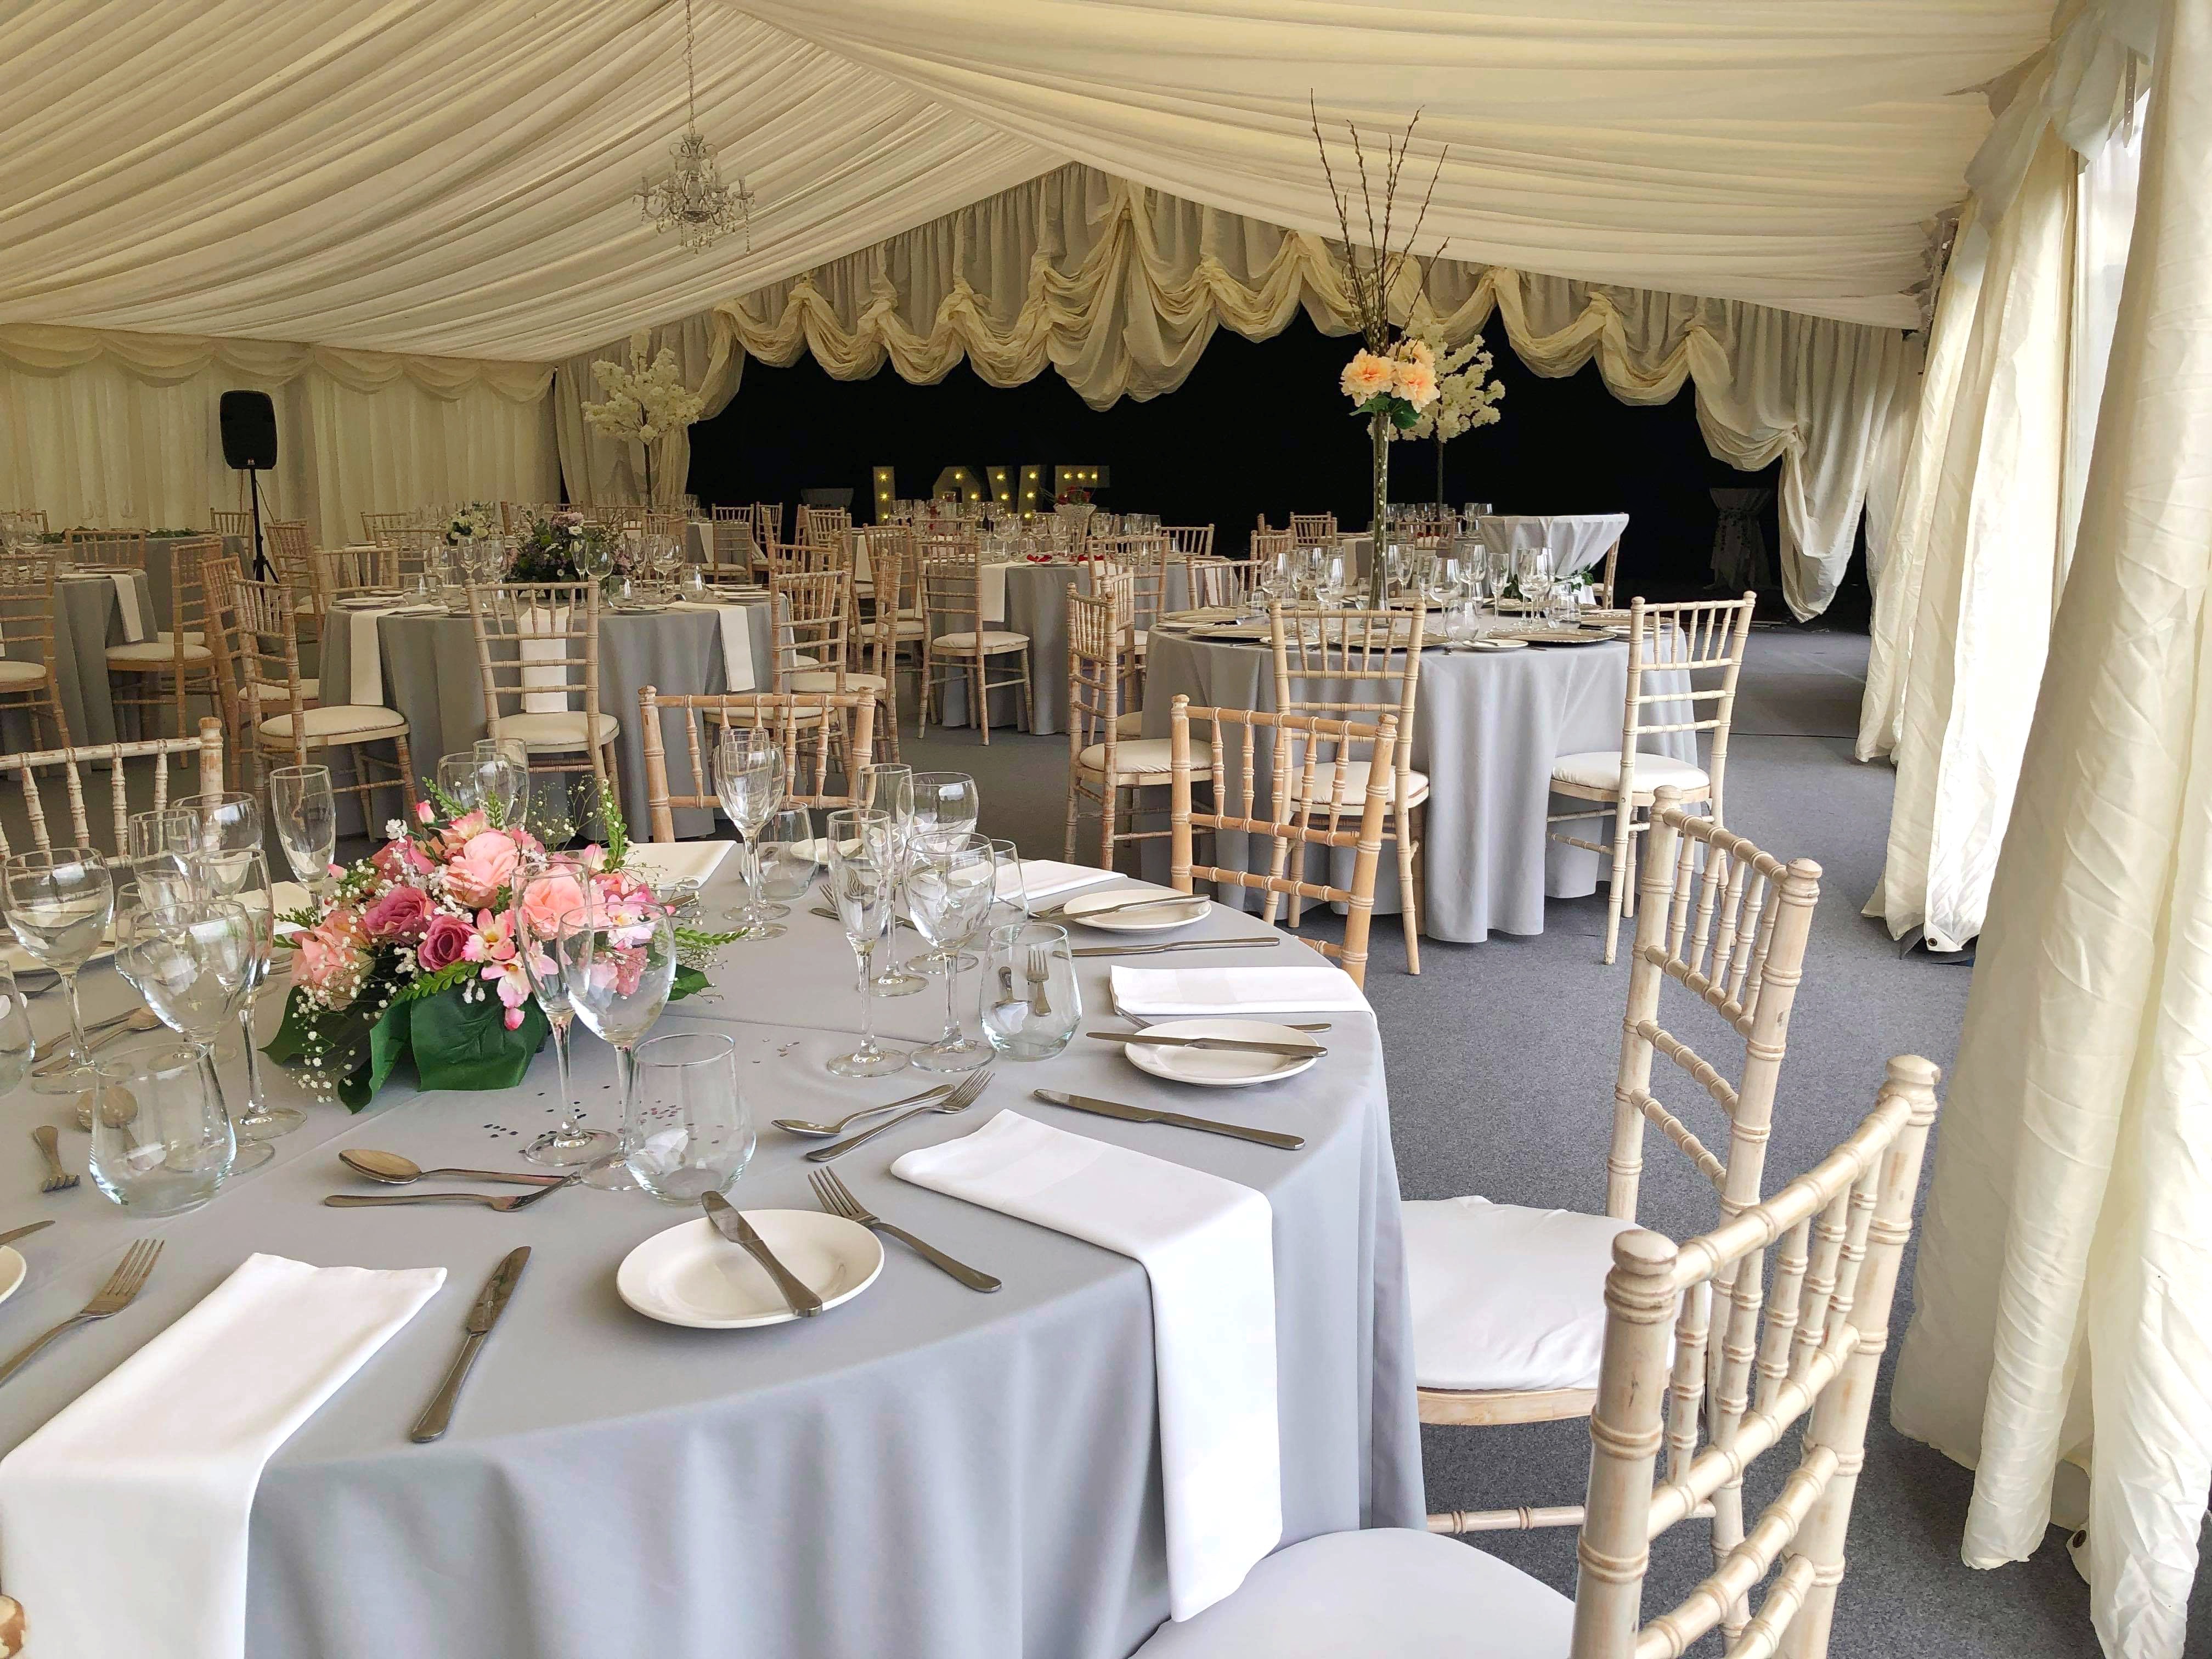 Wedding Venue Tables and Chairs